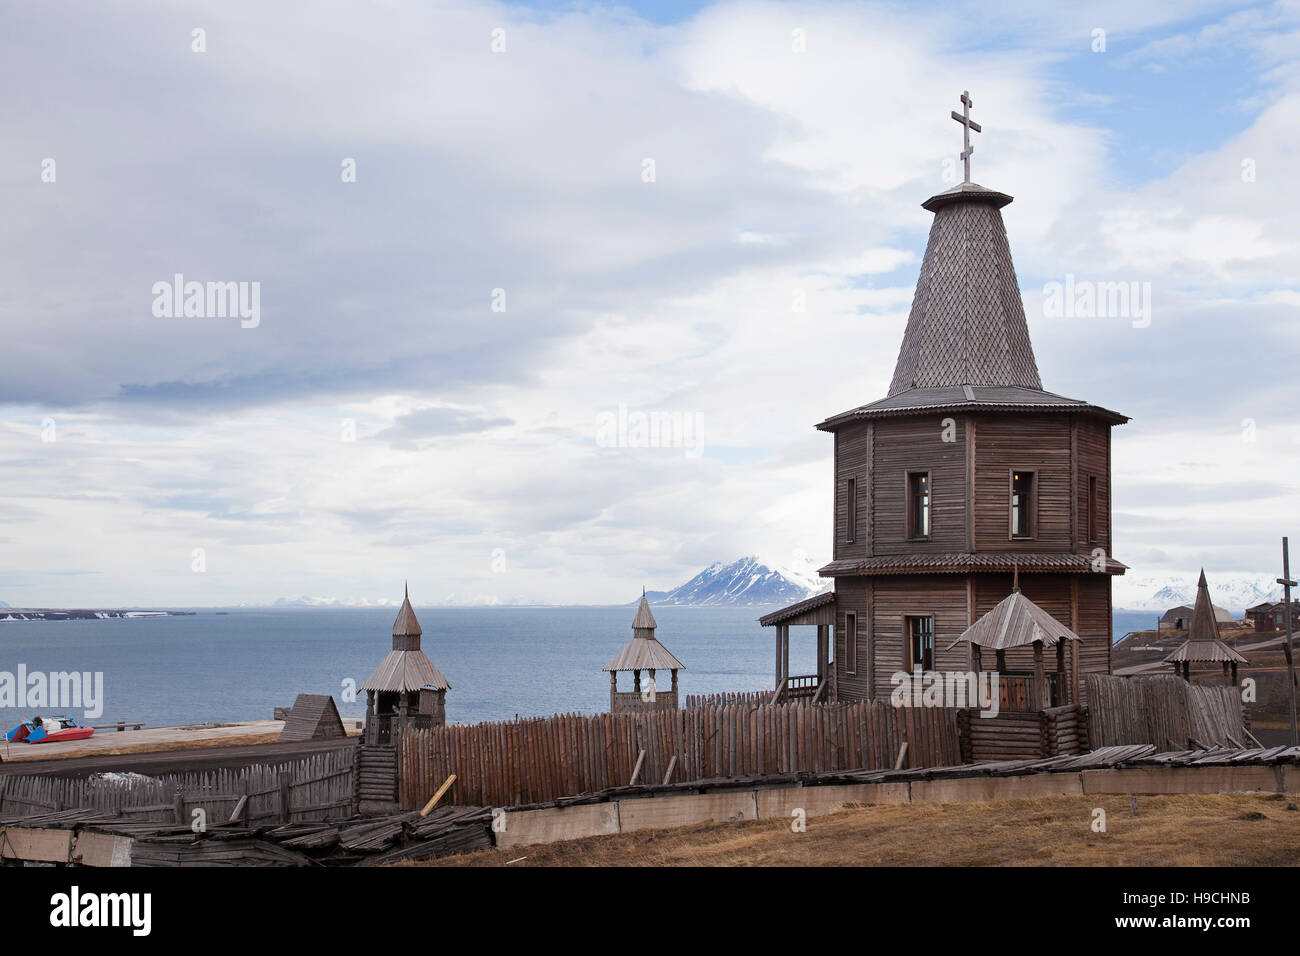 Wooden Russian Orthodox church in Pomor style at Barentsburg, coal mining settlement at Isfjorden, Spitsbergen / Svalbard, Norway Stock Photo